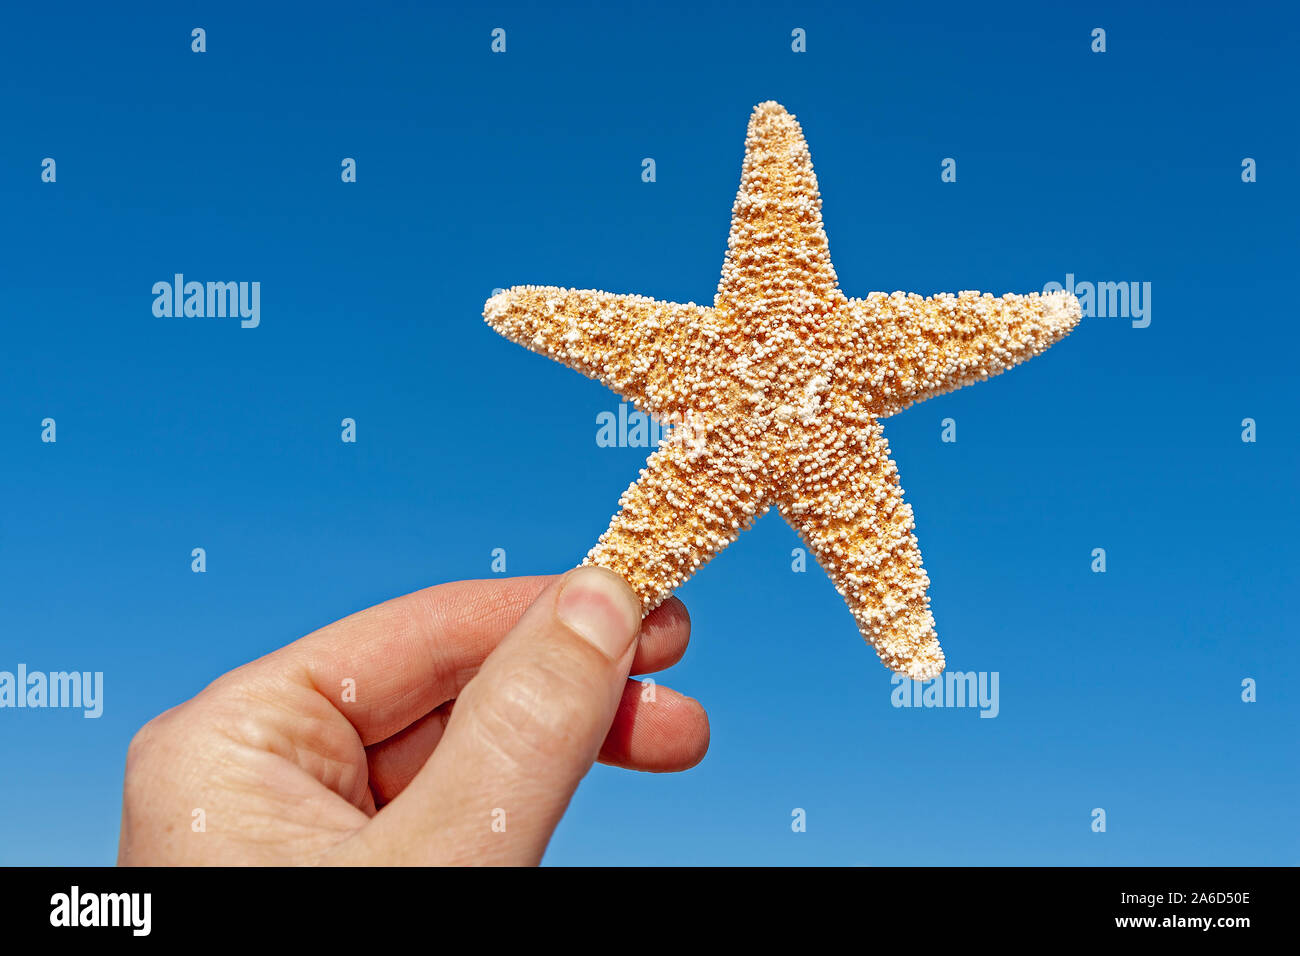 A hand is holding a dried starfish. Stock Photo